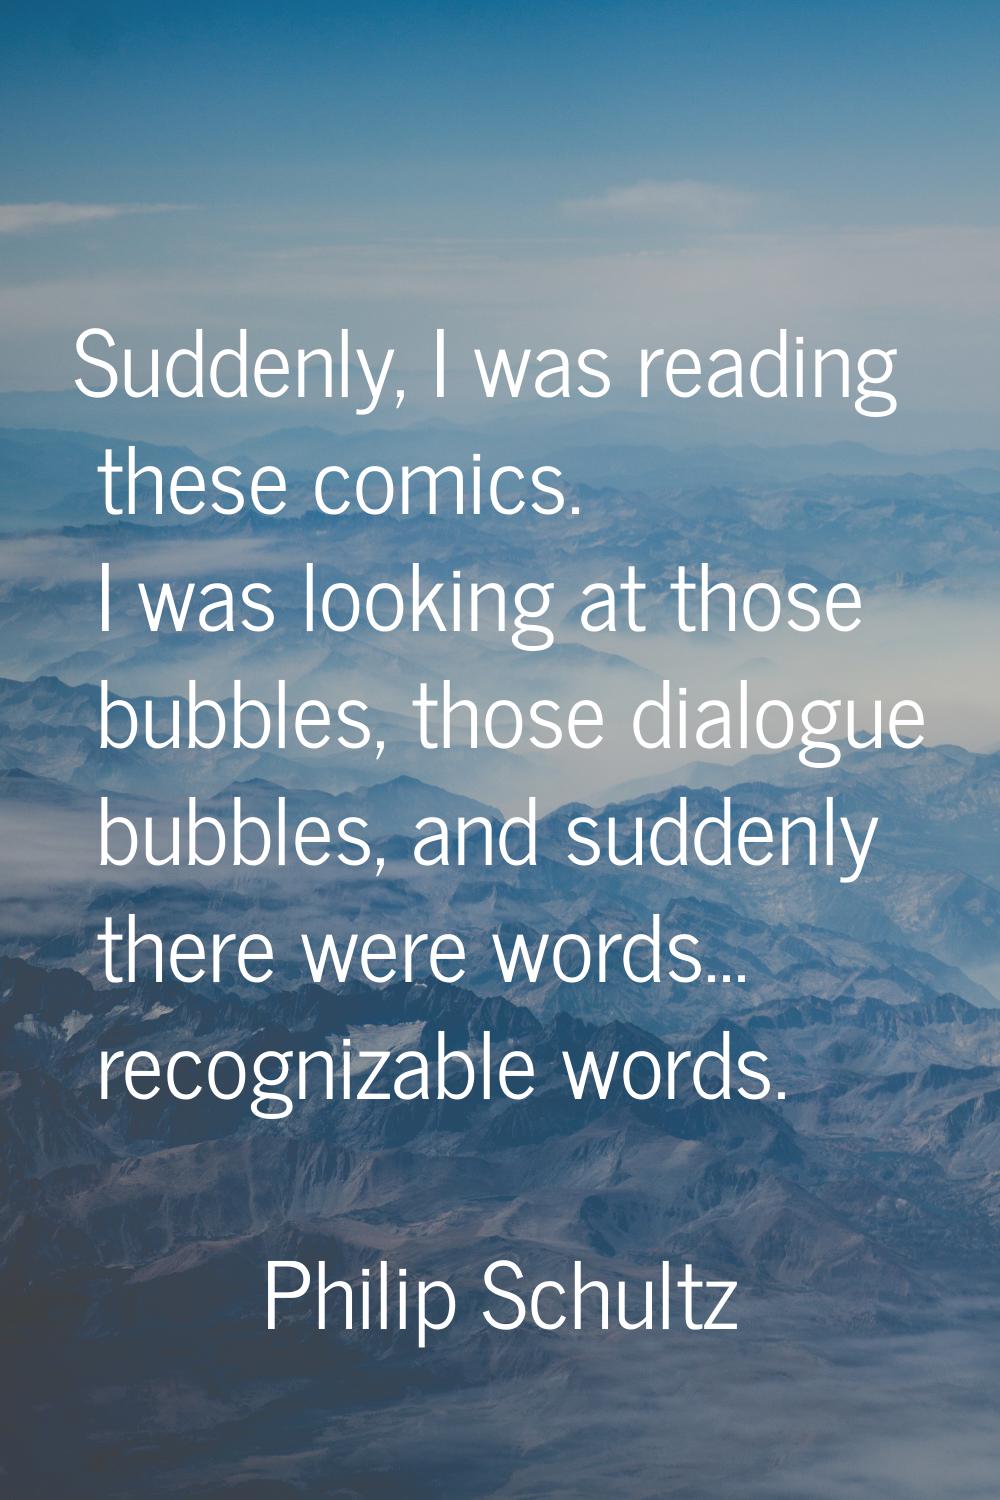 Suddenly, I was reading these comics. I was looking at those bubbles, those dialogue bubbles, and s